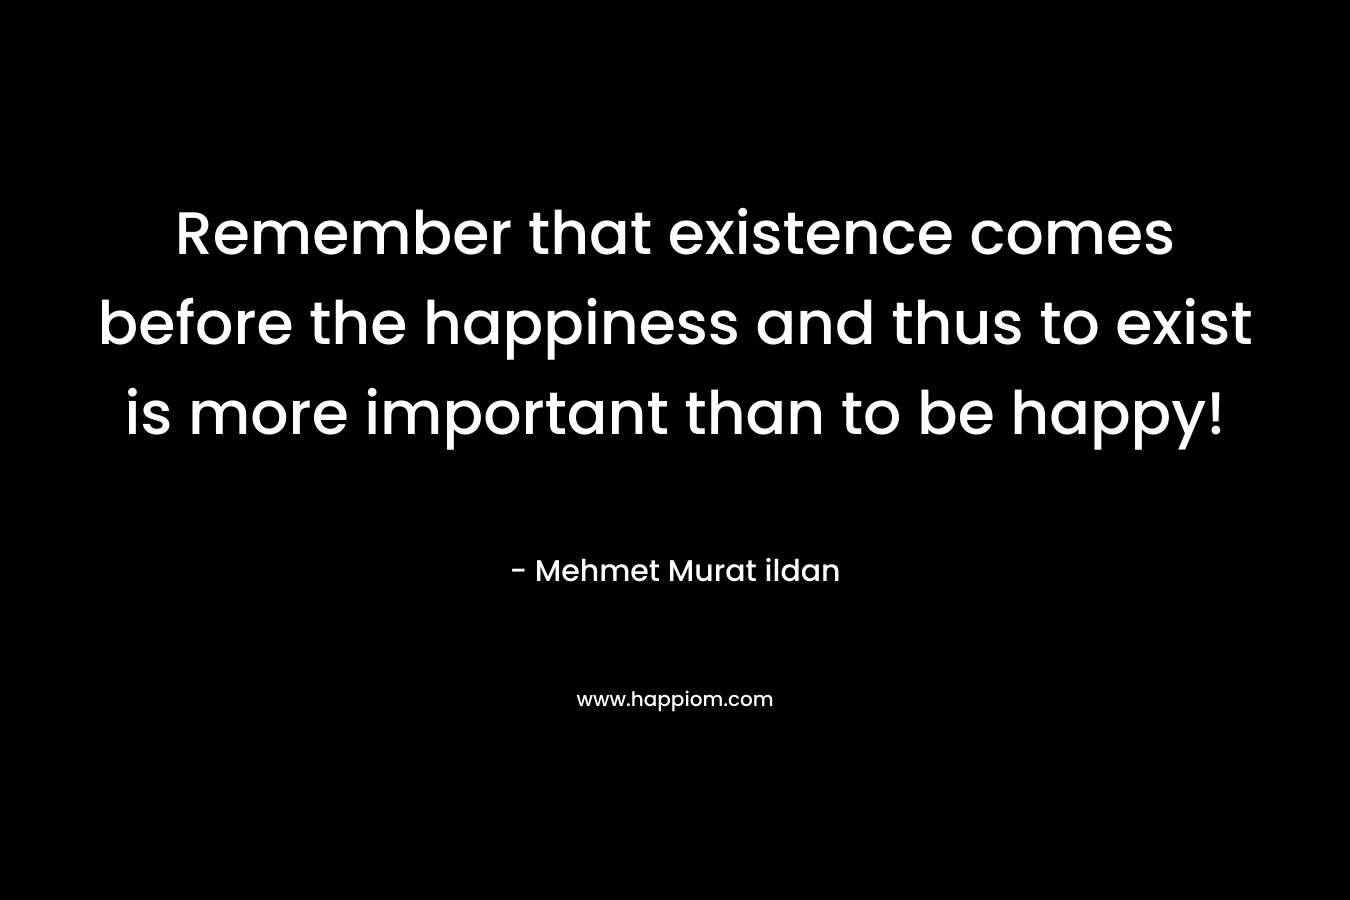 Remember that existence comes before the happiness and thus to exist is more important than to be happy!